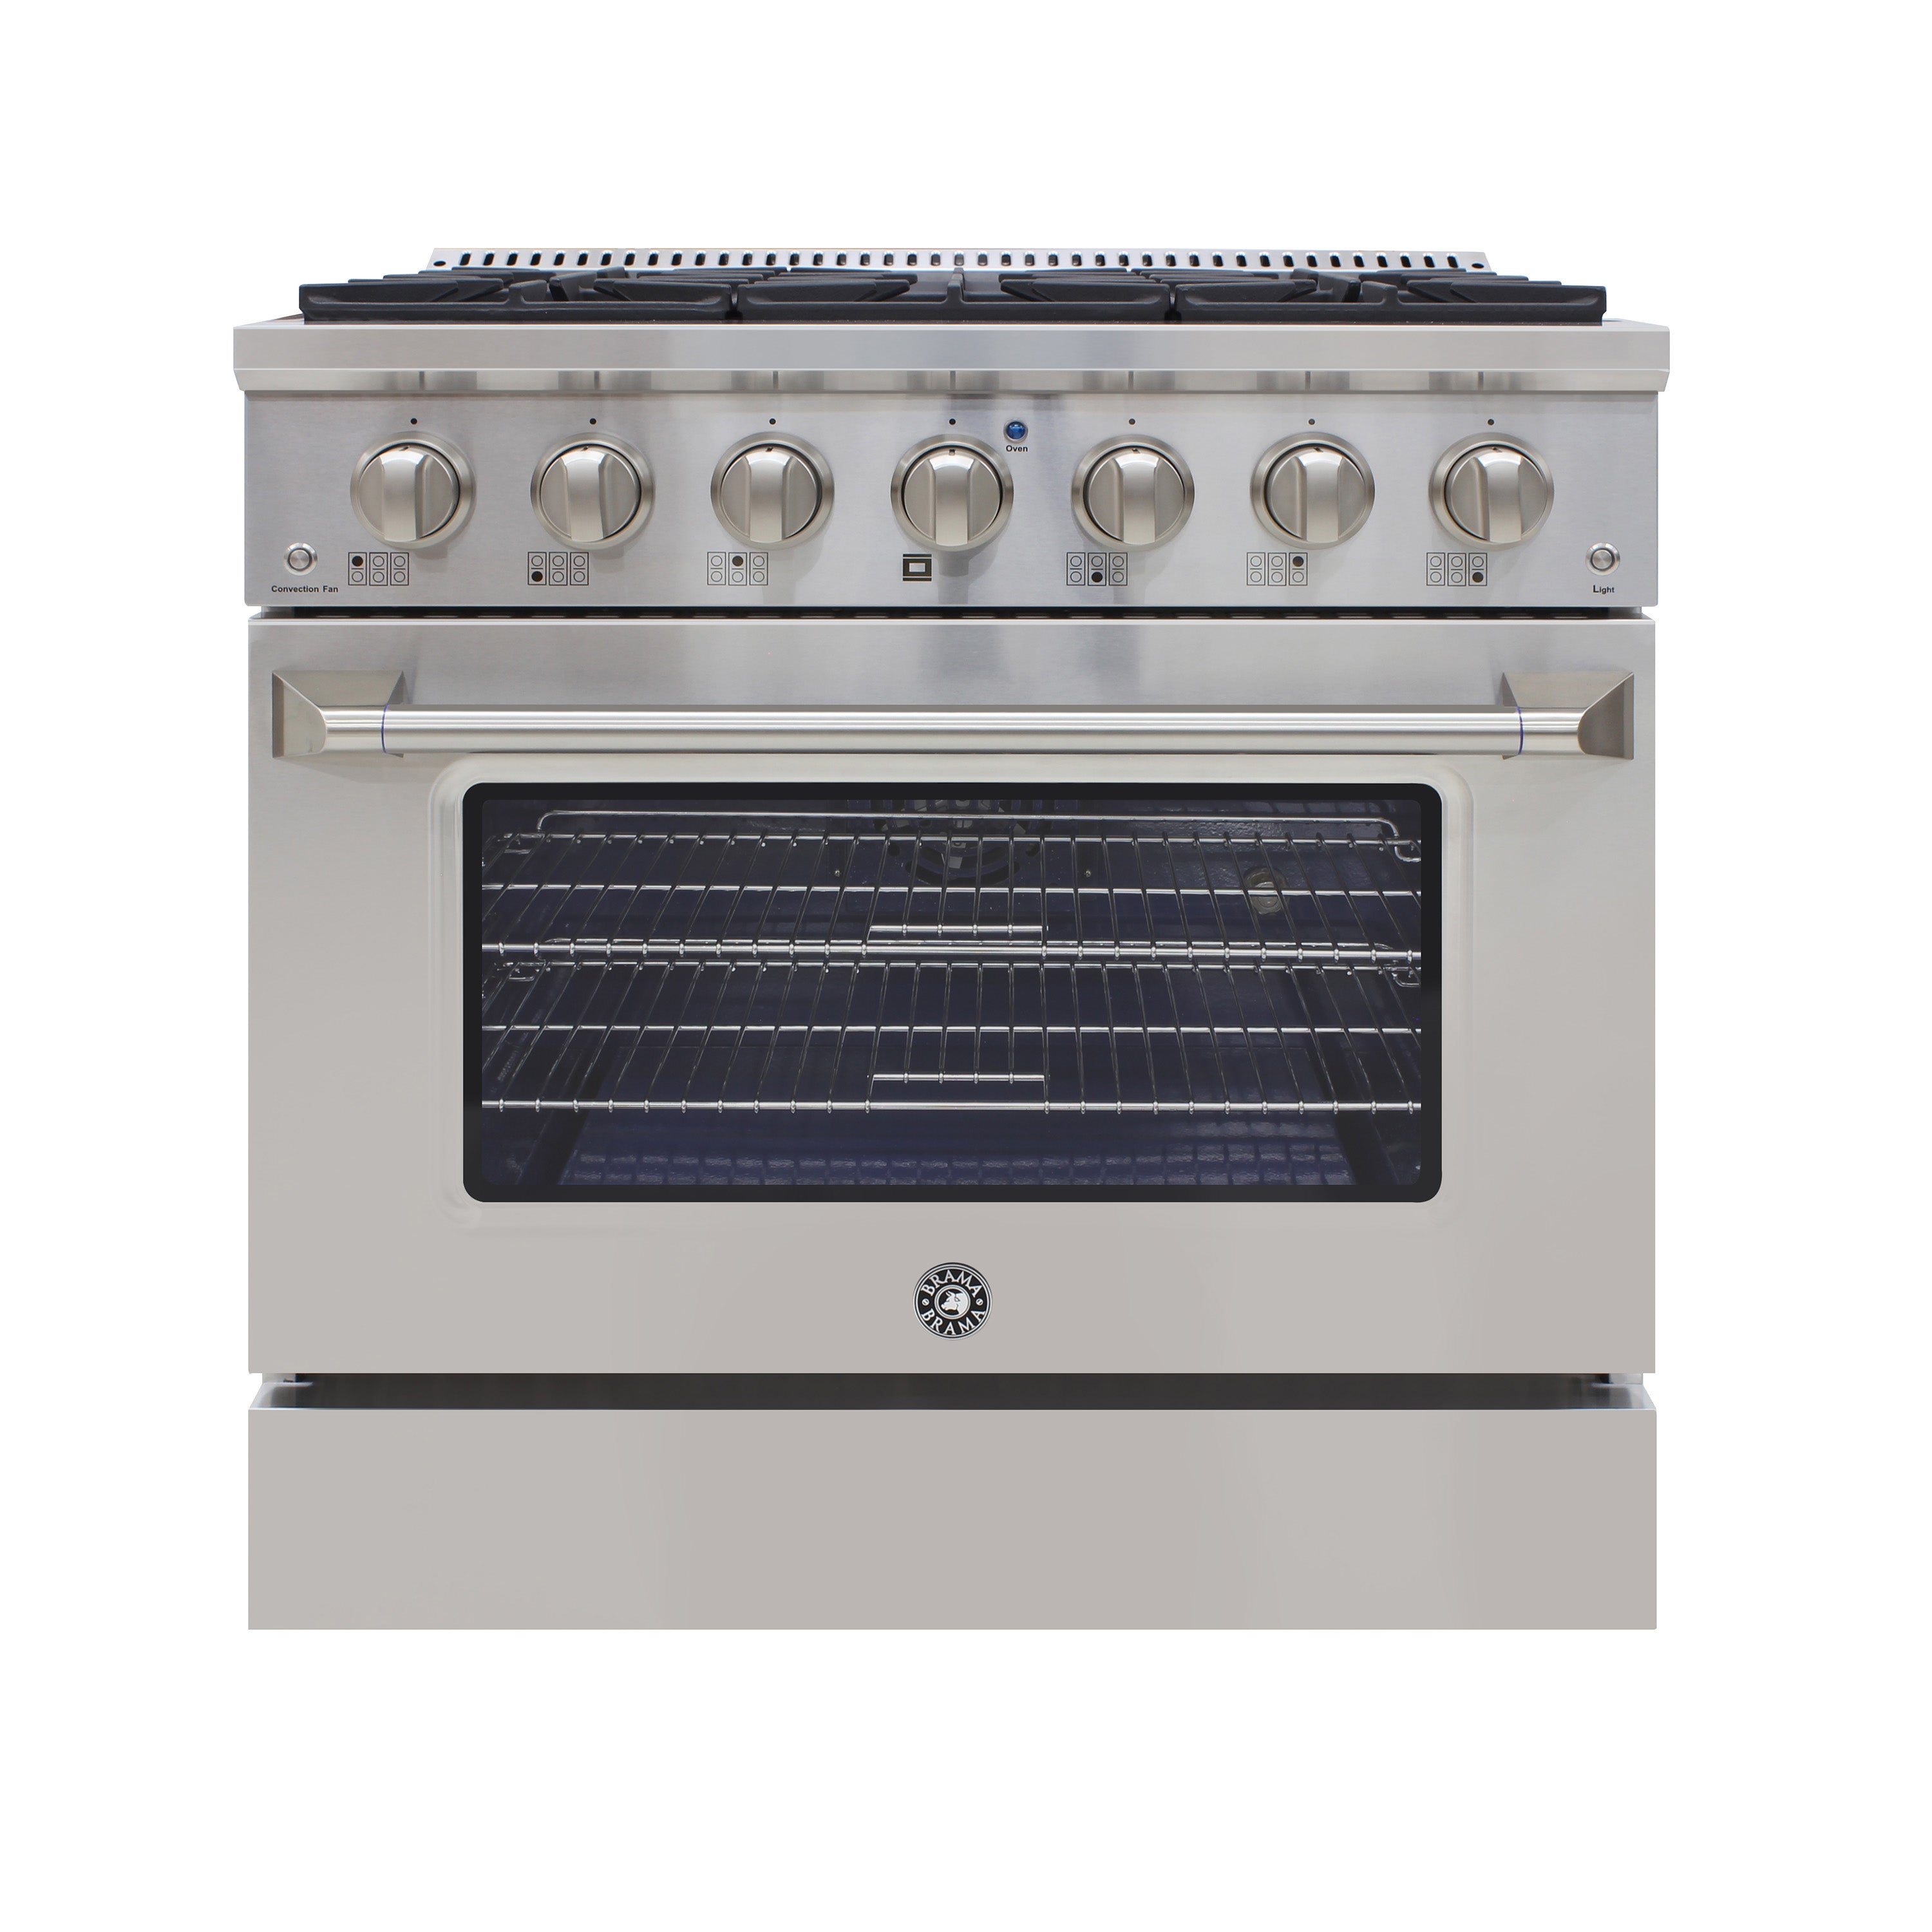 Vinotemp - BR-36SSGG, Brama by Vinotemp 36" Gas Range and Oven, 5.2 cu. ft. Capacity, in Stainless Steel